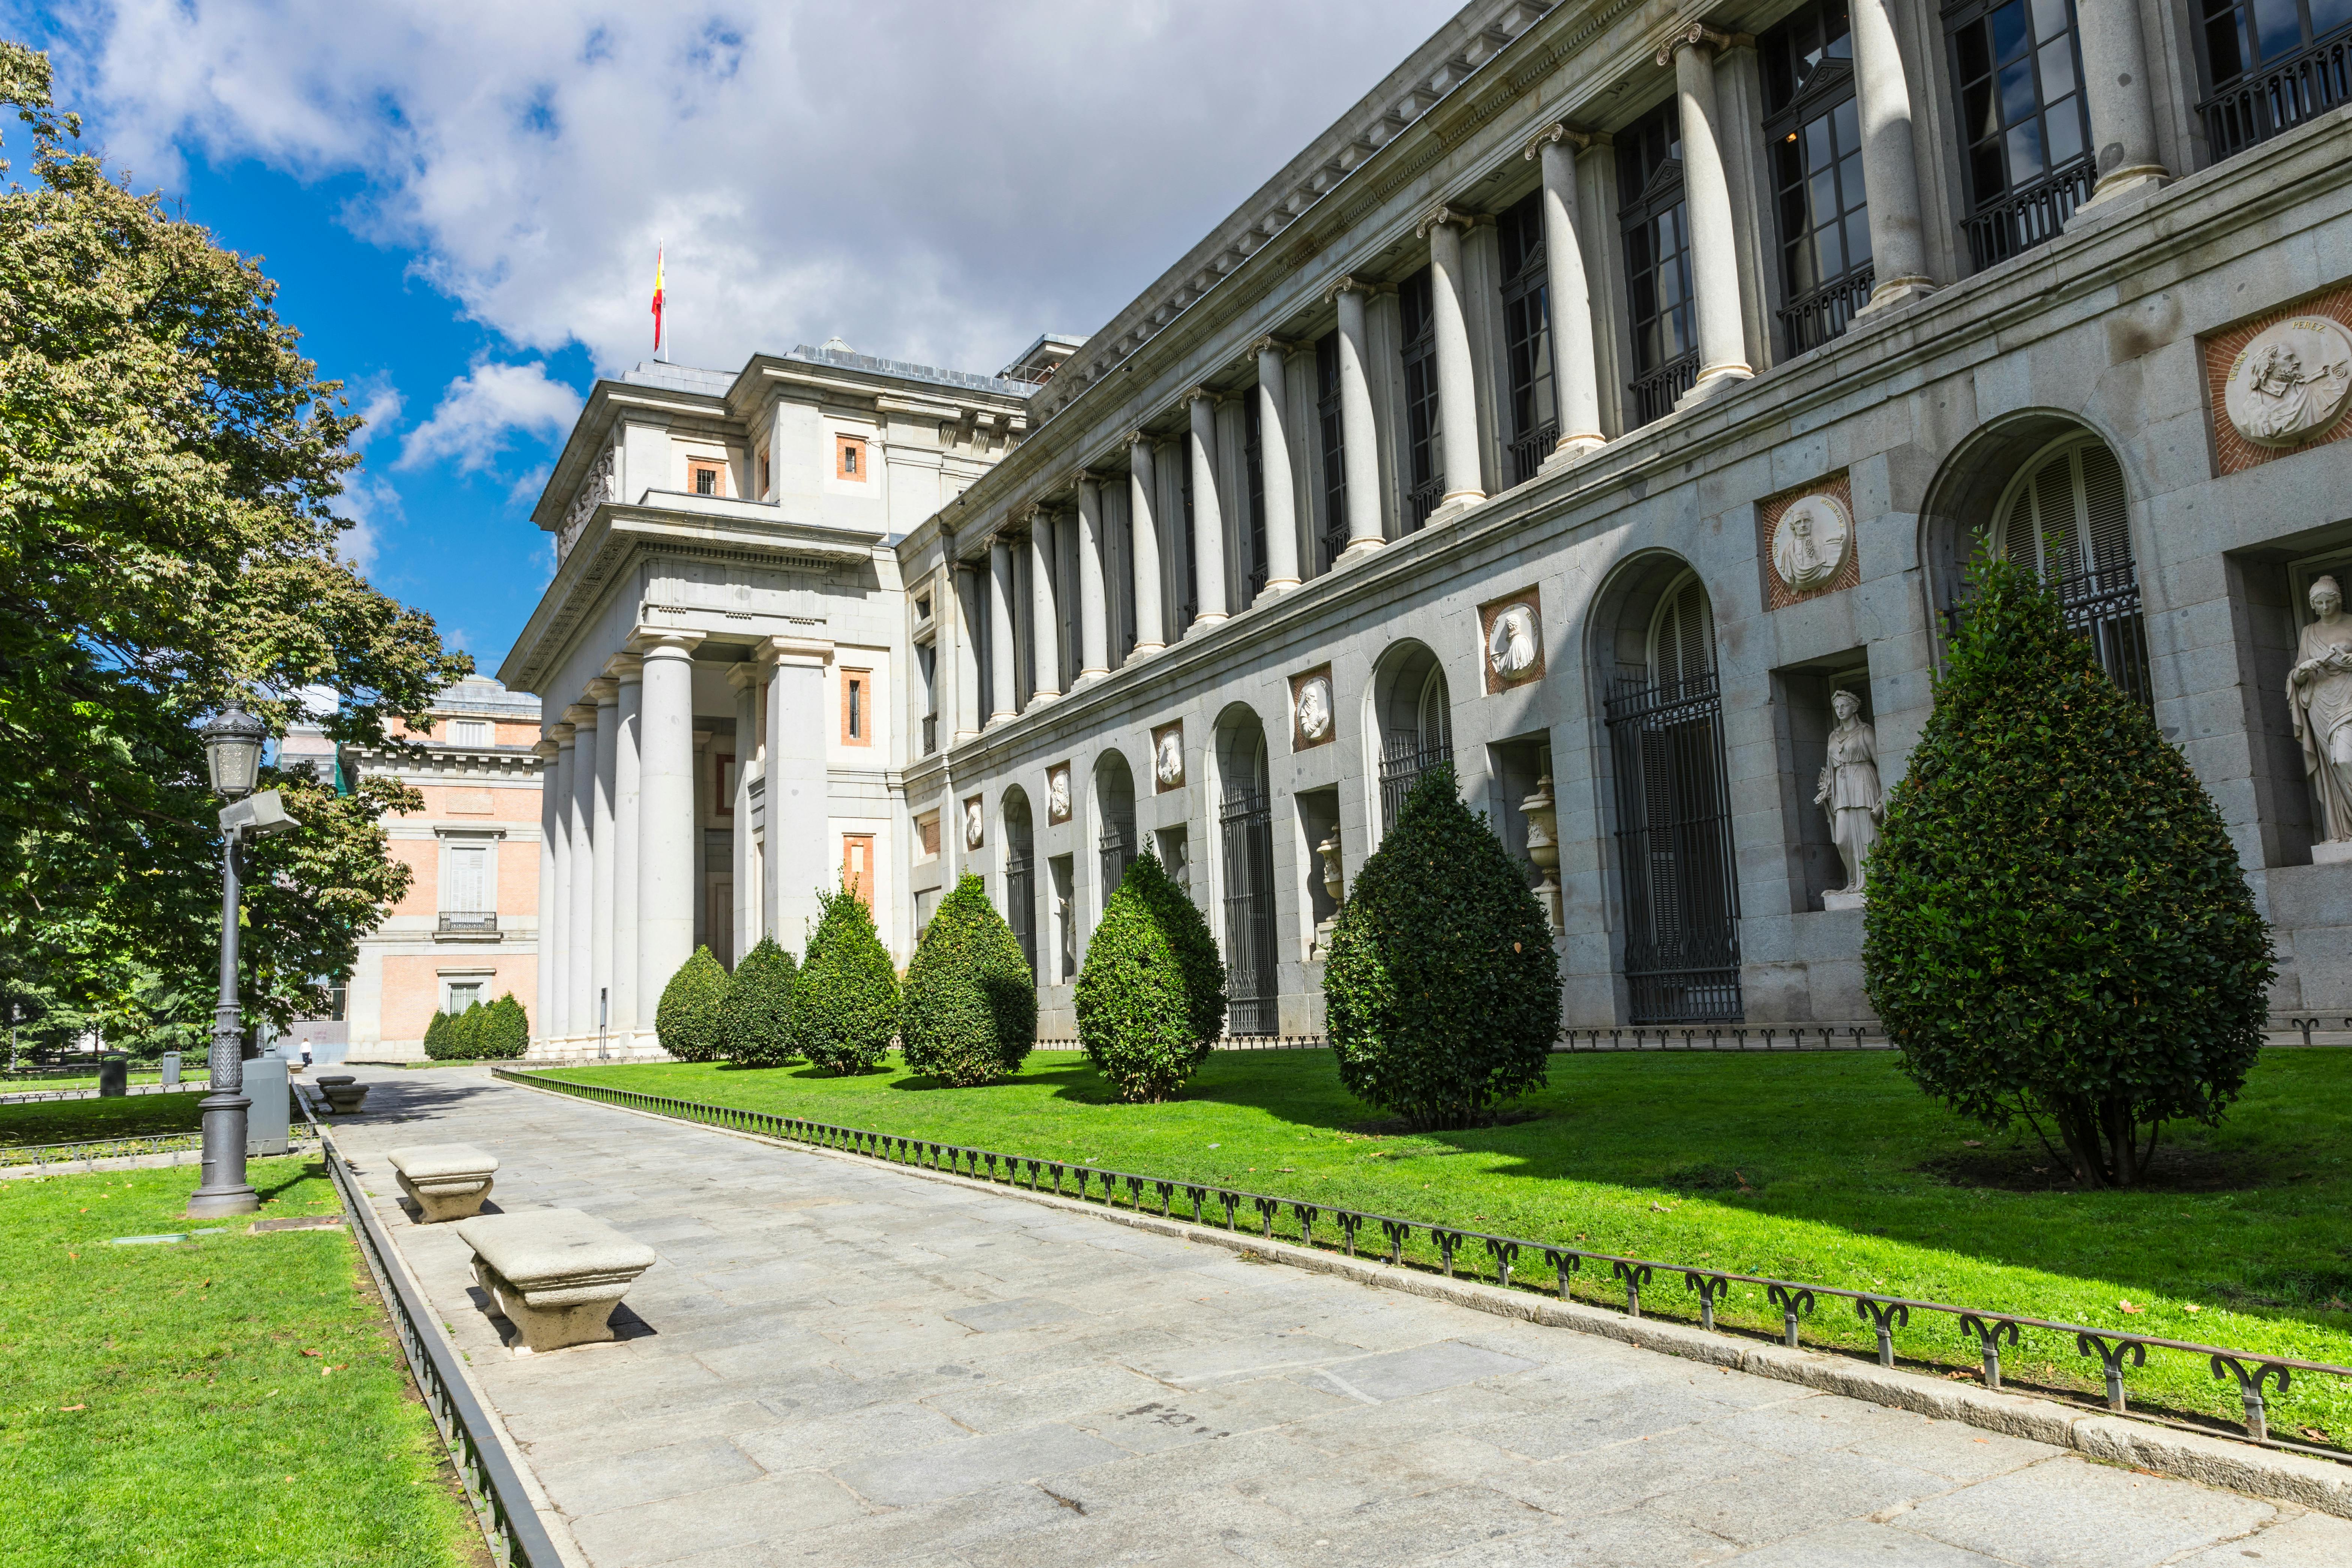 Guided visit and tickets to Prado Museum